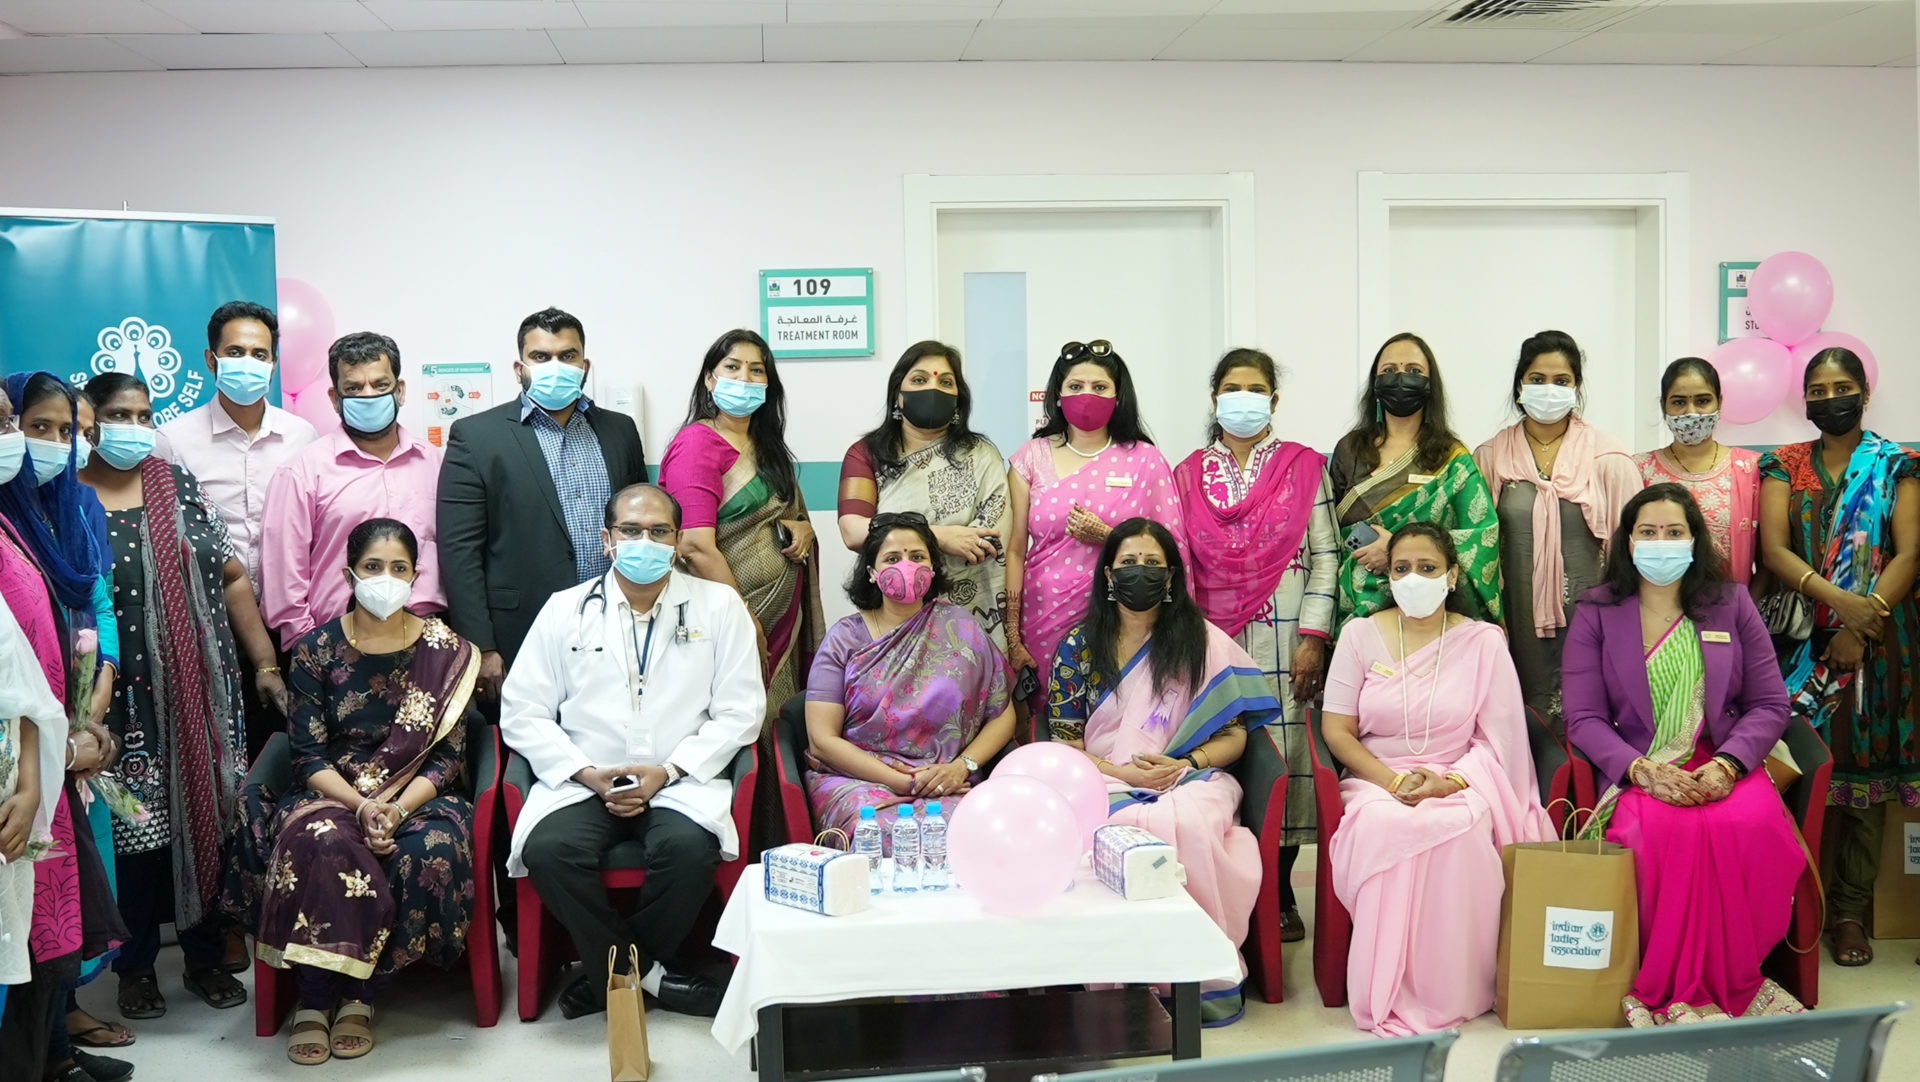 Breast Cancer Awareness Program at Al Hilal Manama in Collaboration with Indian ladies Association